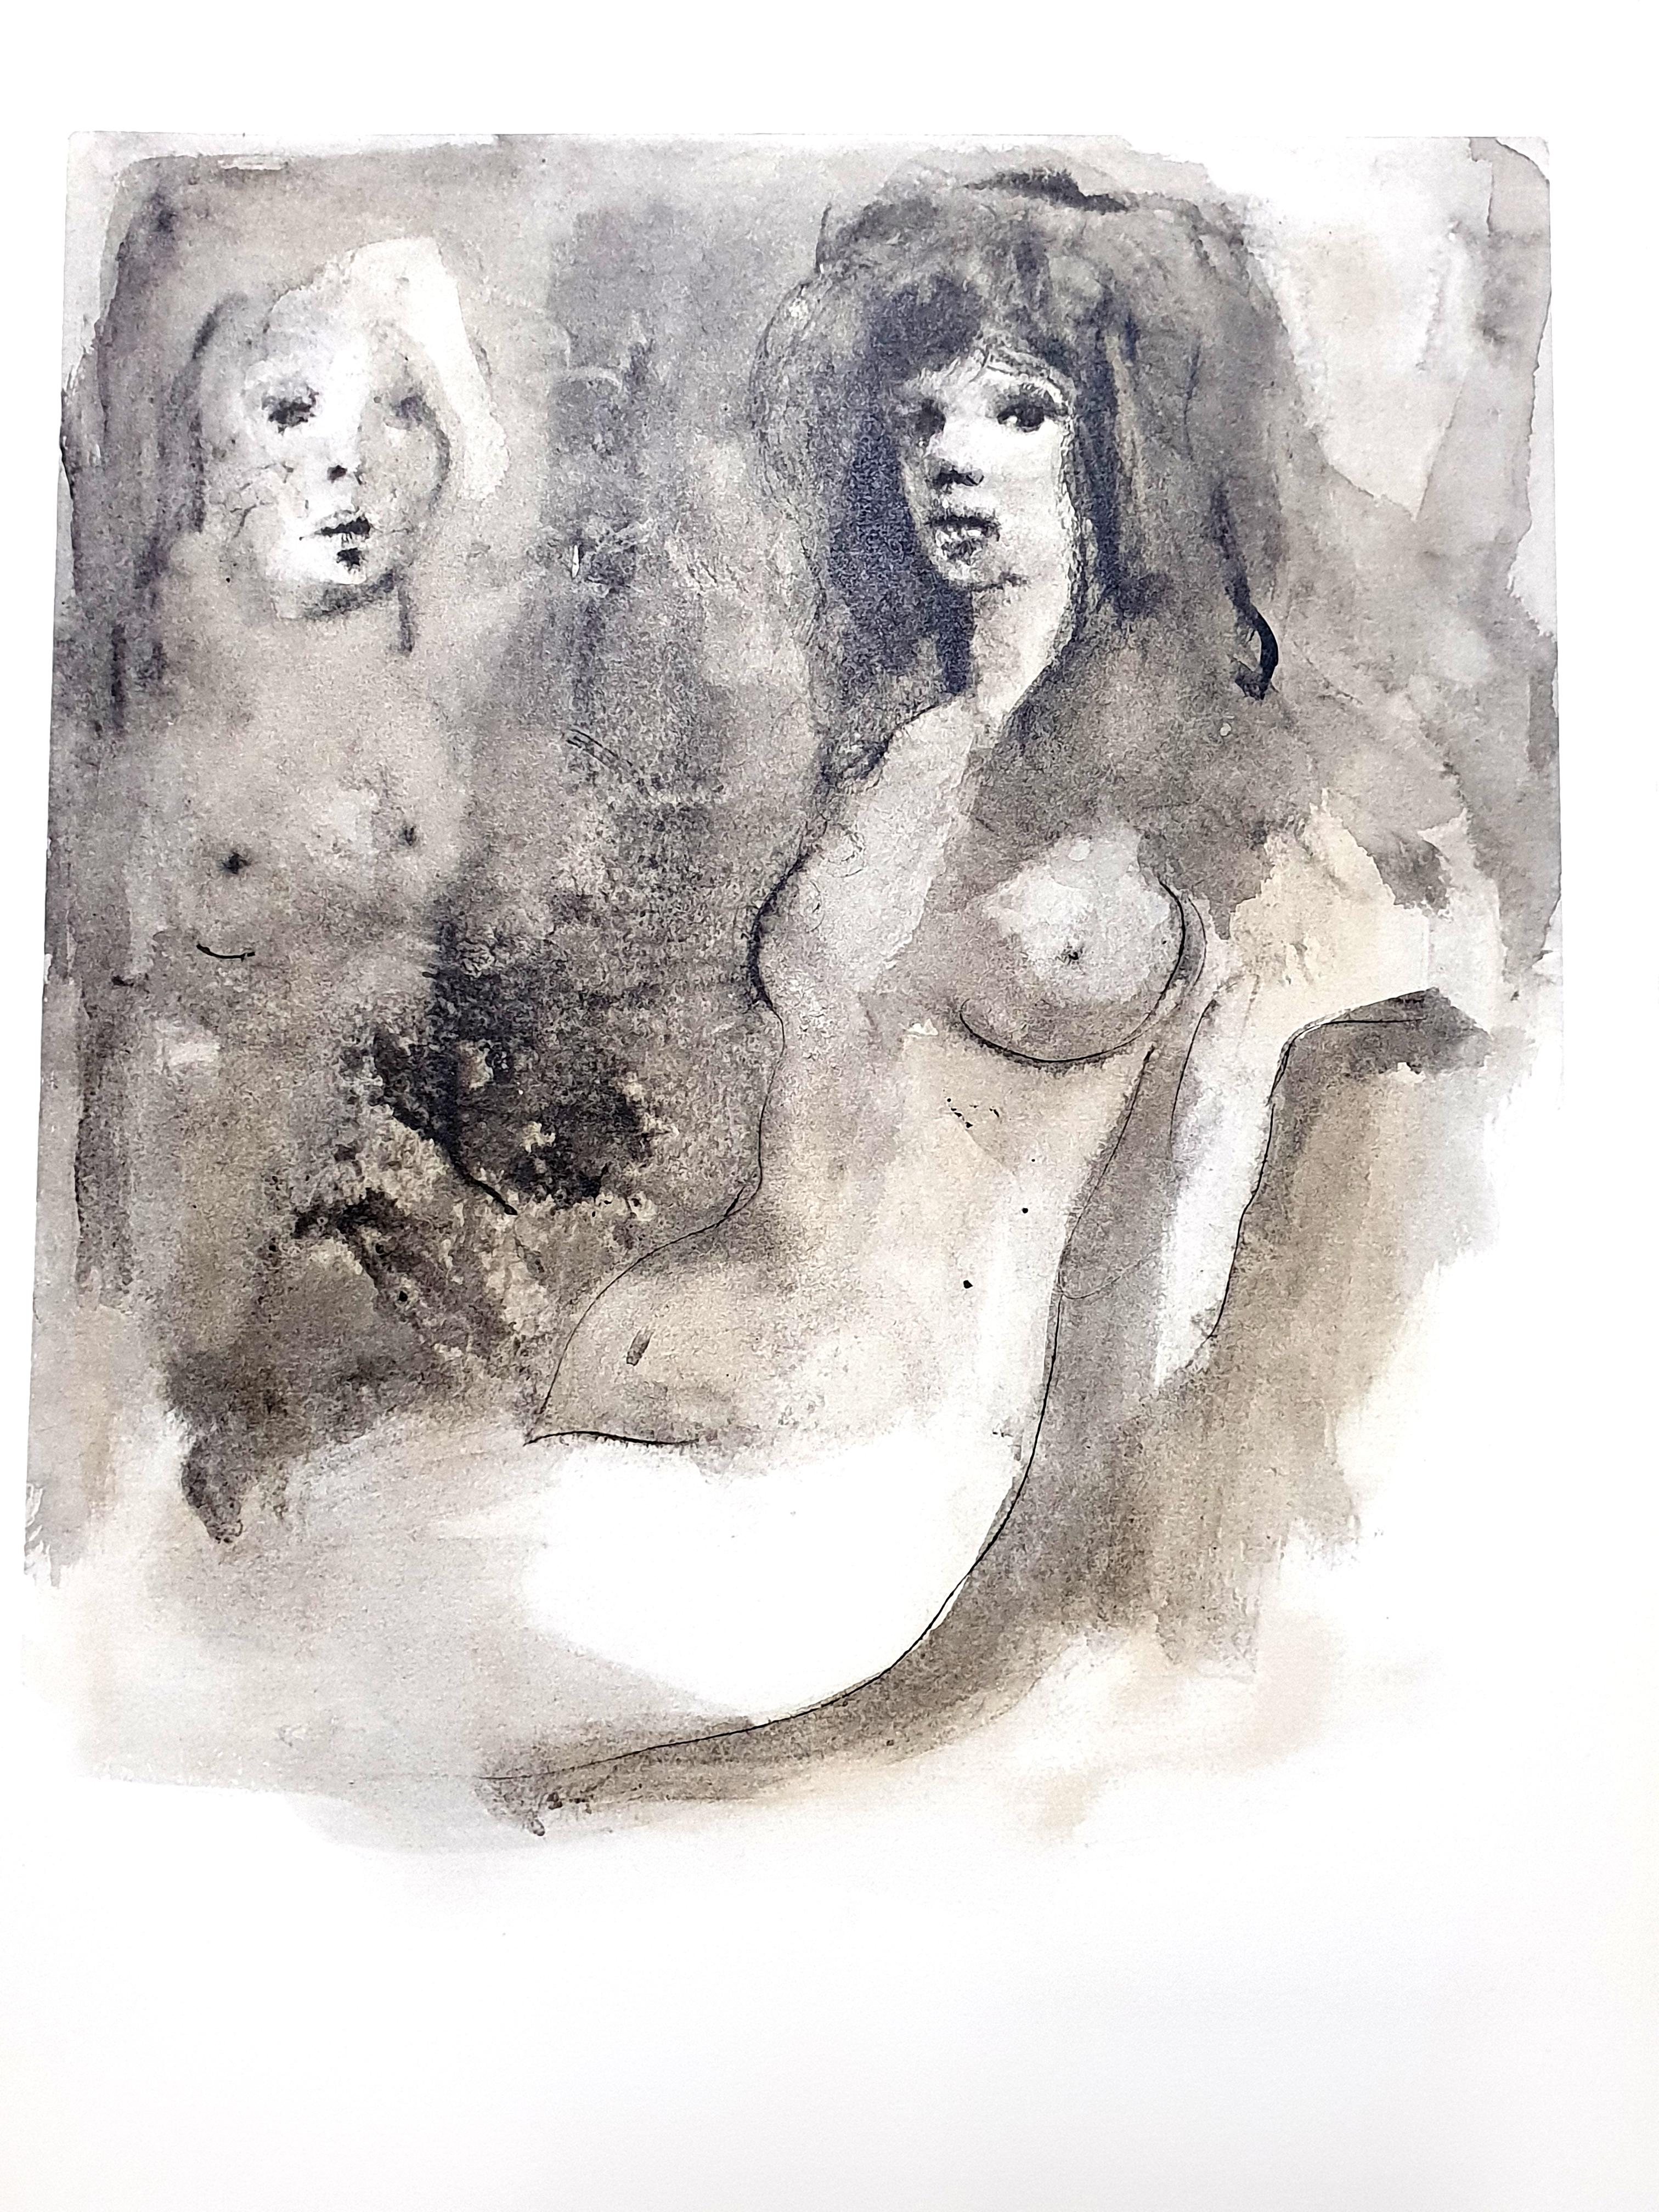 Leonor Fini - Young Beauty - Original Lithograph
The Flowers of Evil
1964
Conditions: excellent
Edition: 500 
Dimensions: 46 x 34 cm 
Editions: Le Cercle du Livre Précieux, Paris
Unsigned and unumbered as issued